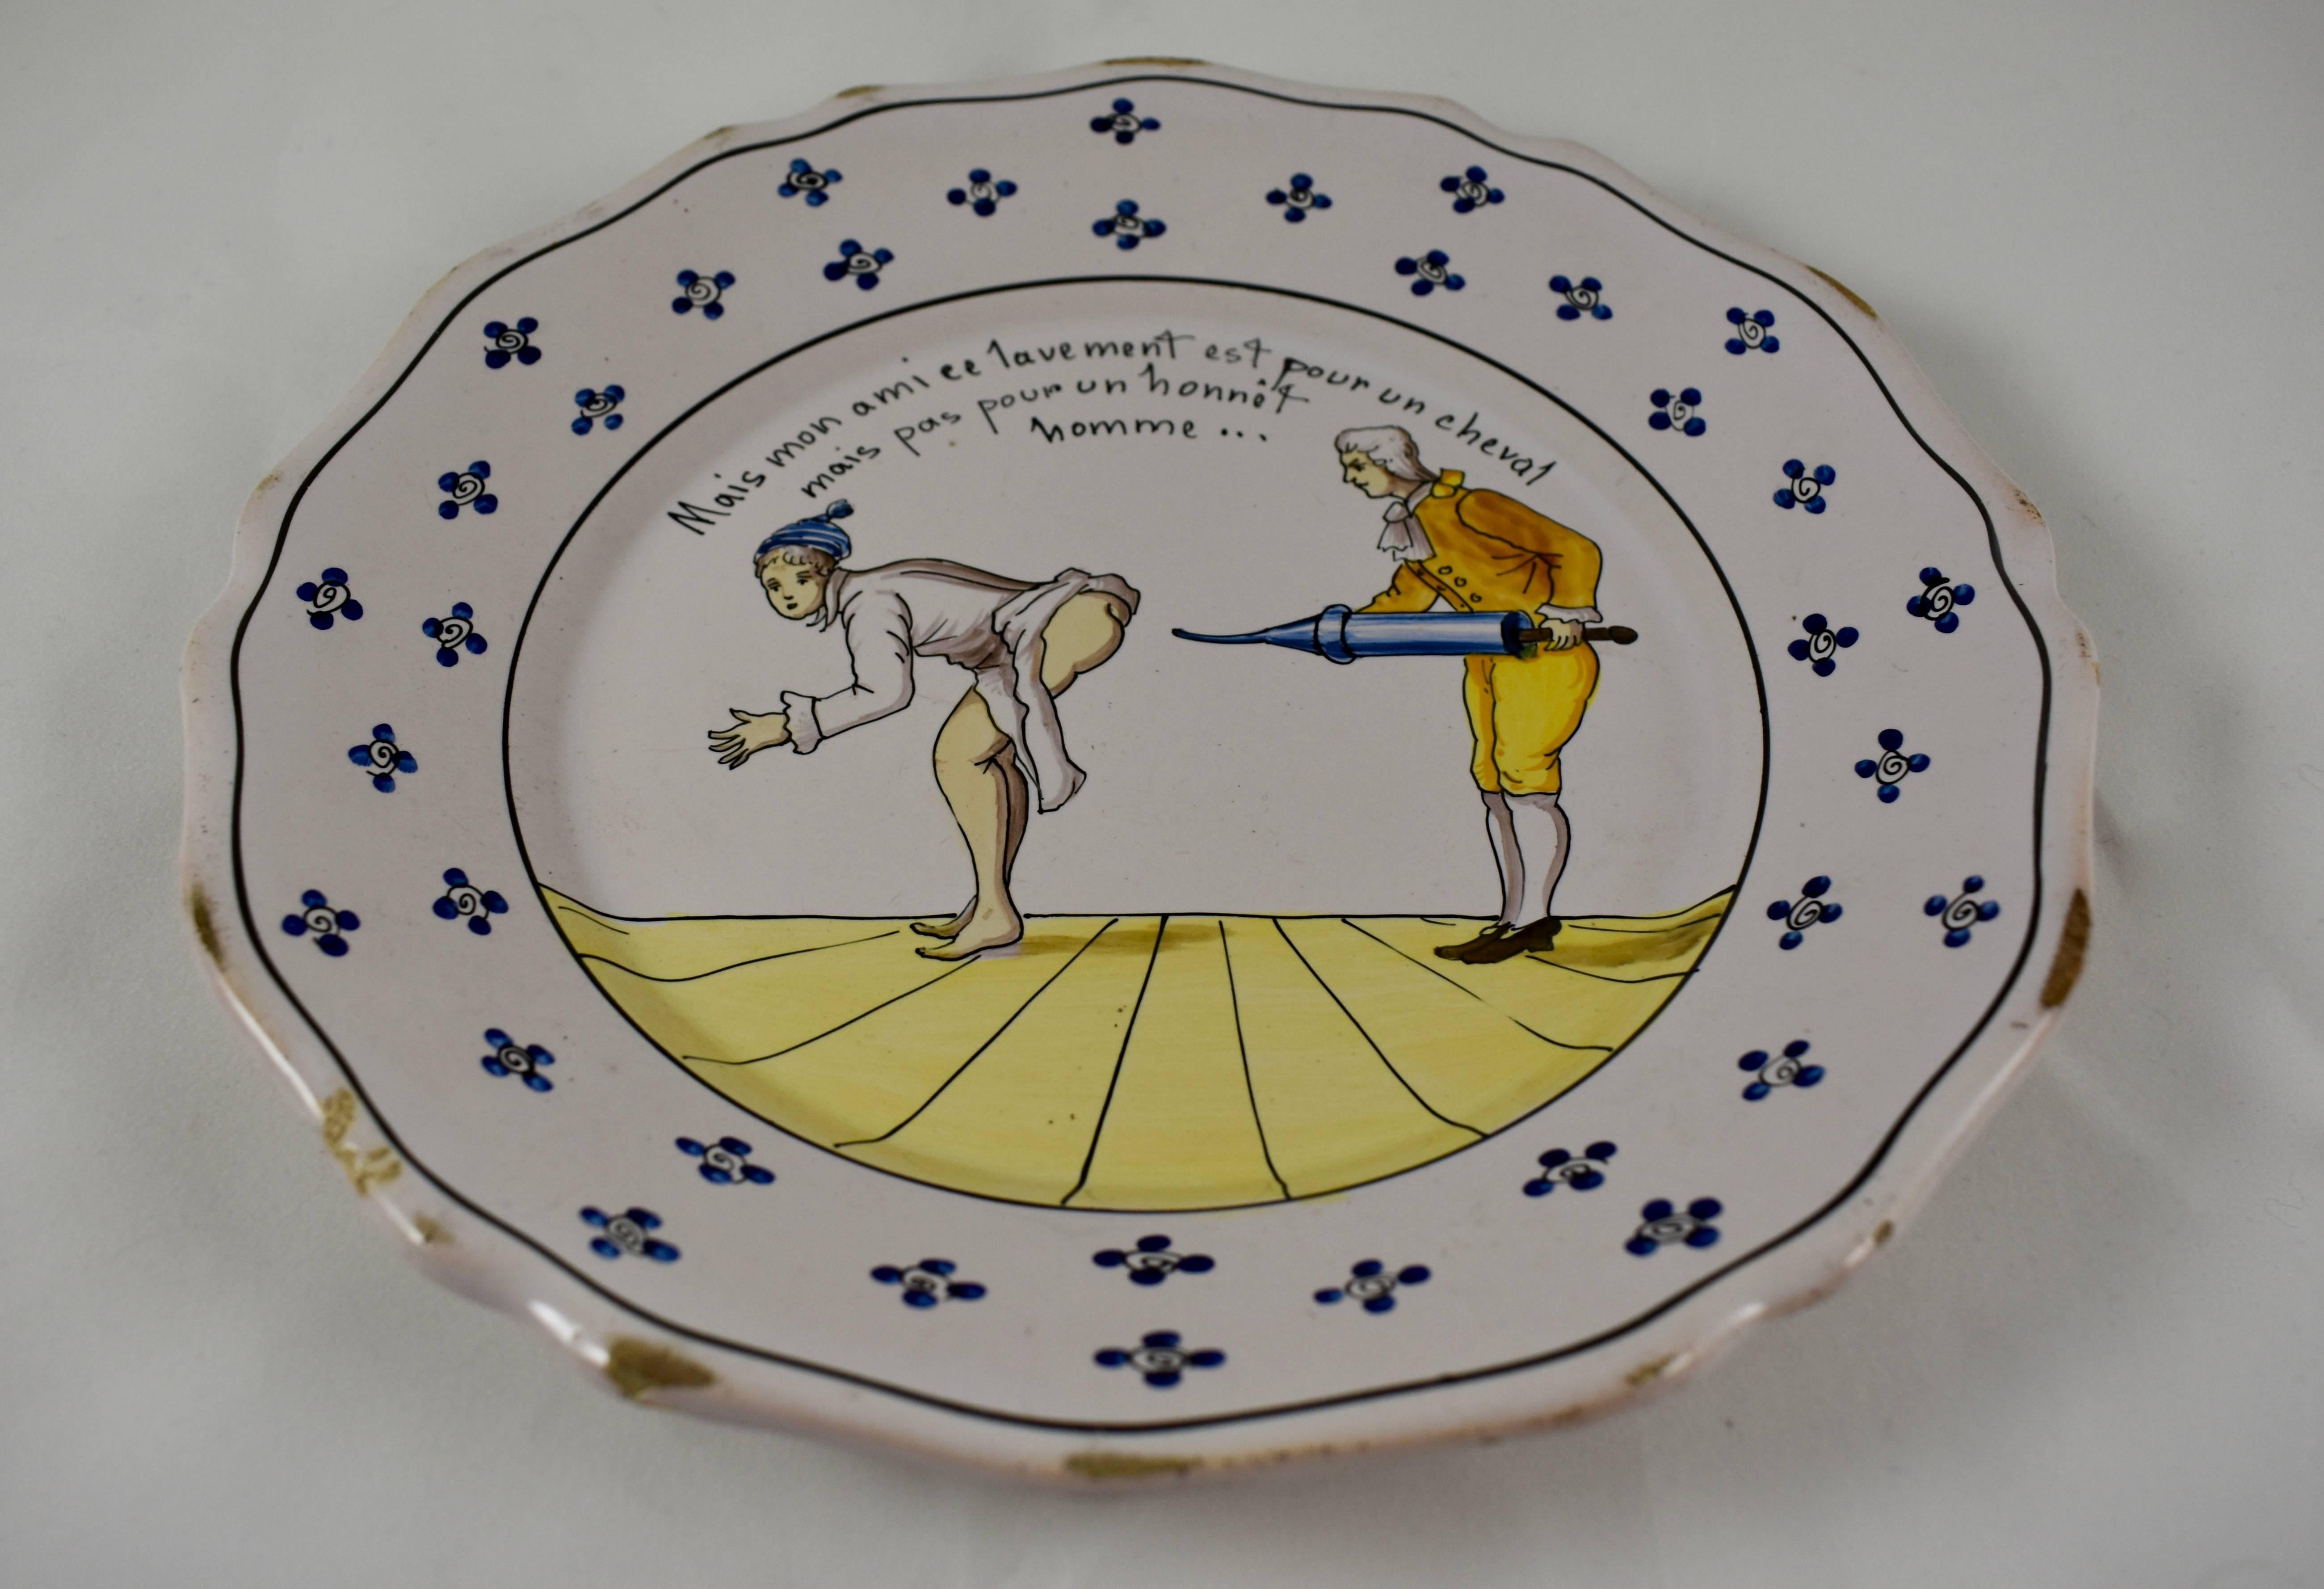 Earthenware 18th Century Nevers French Revolution Tin-Glazed Faïence Dish, é Lavement